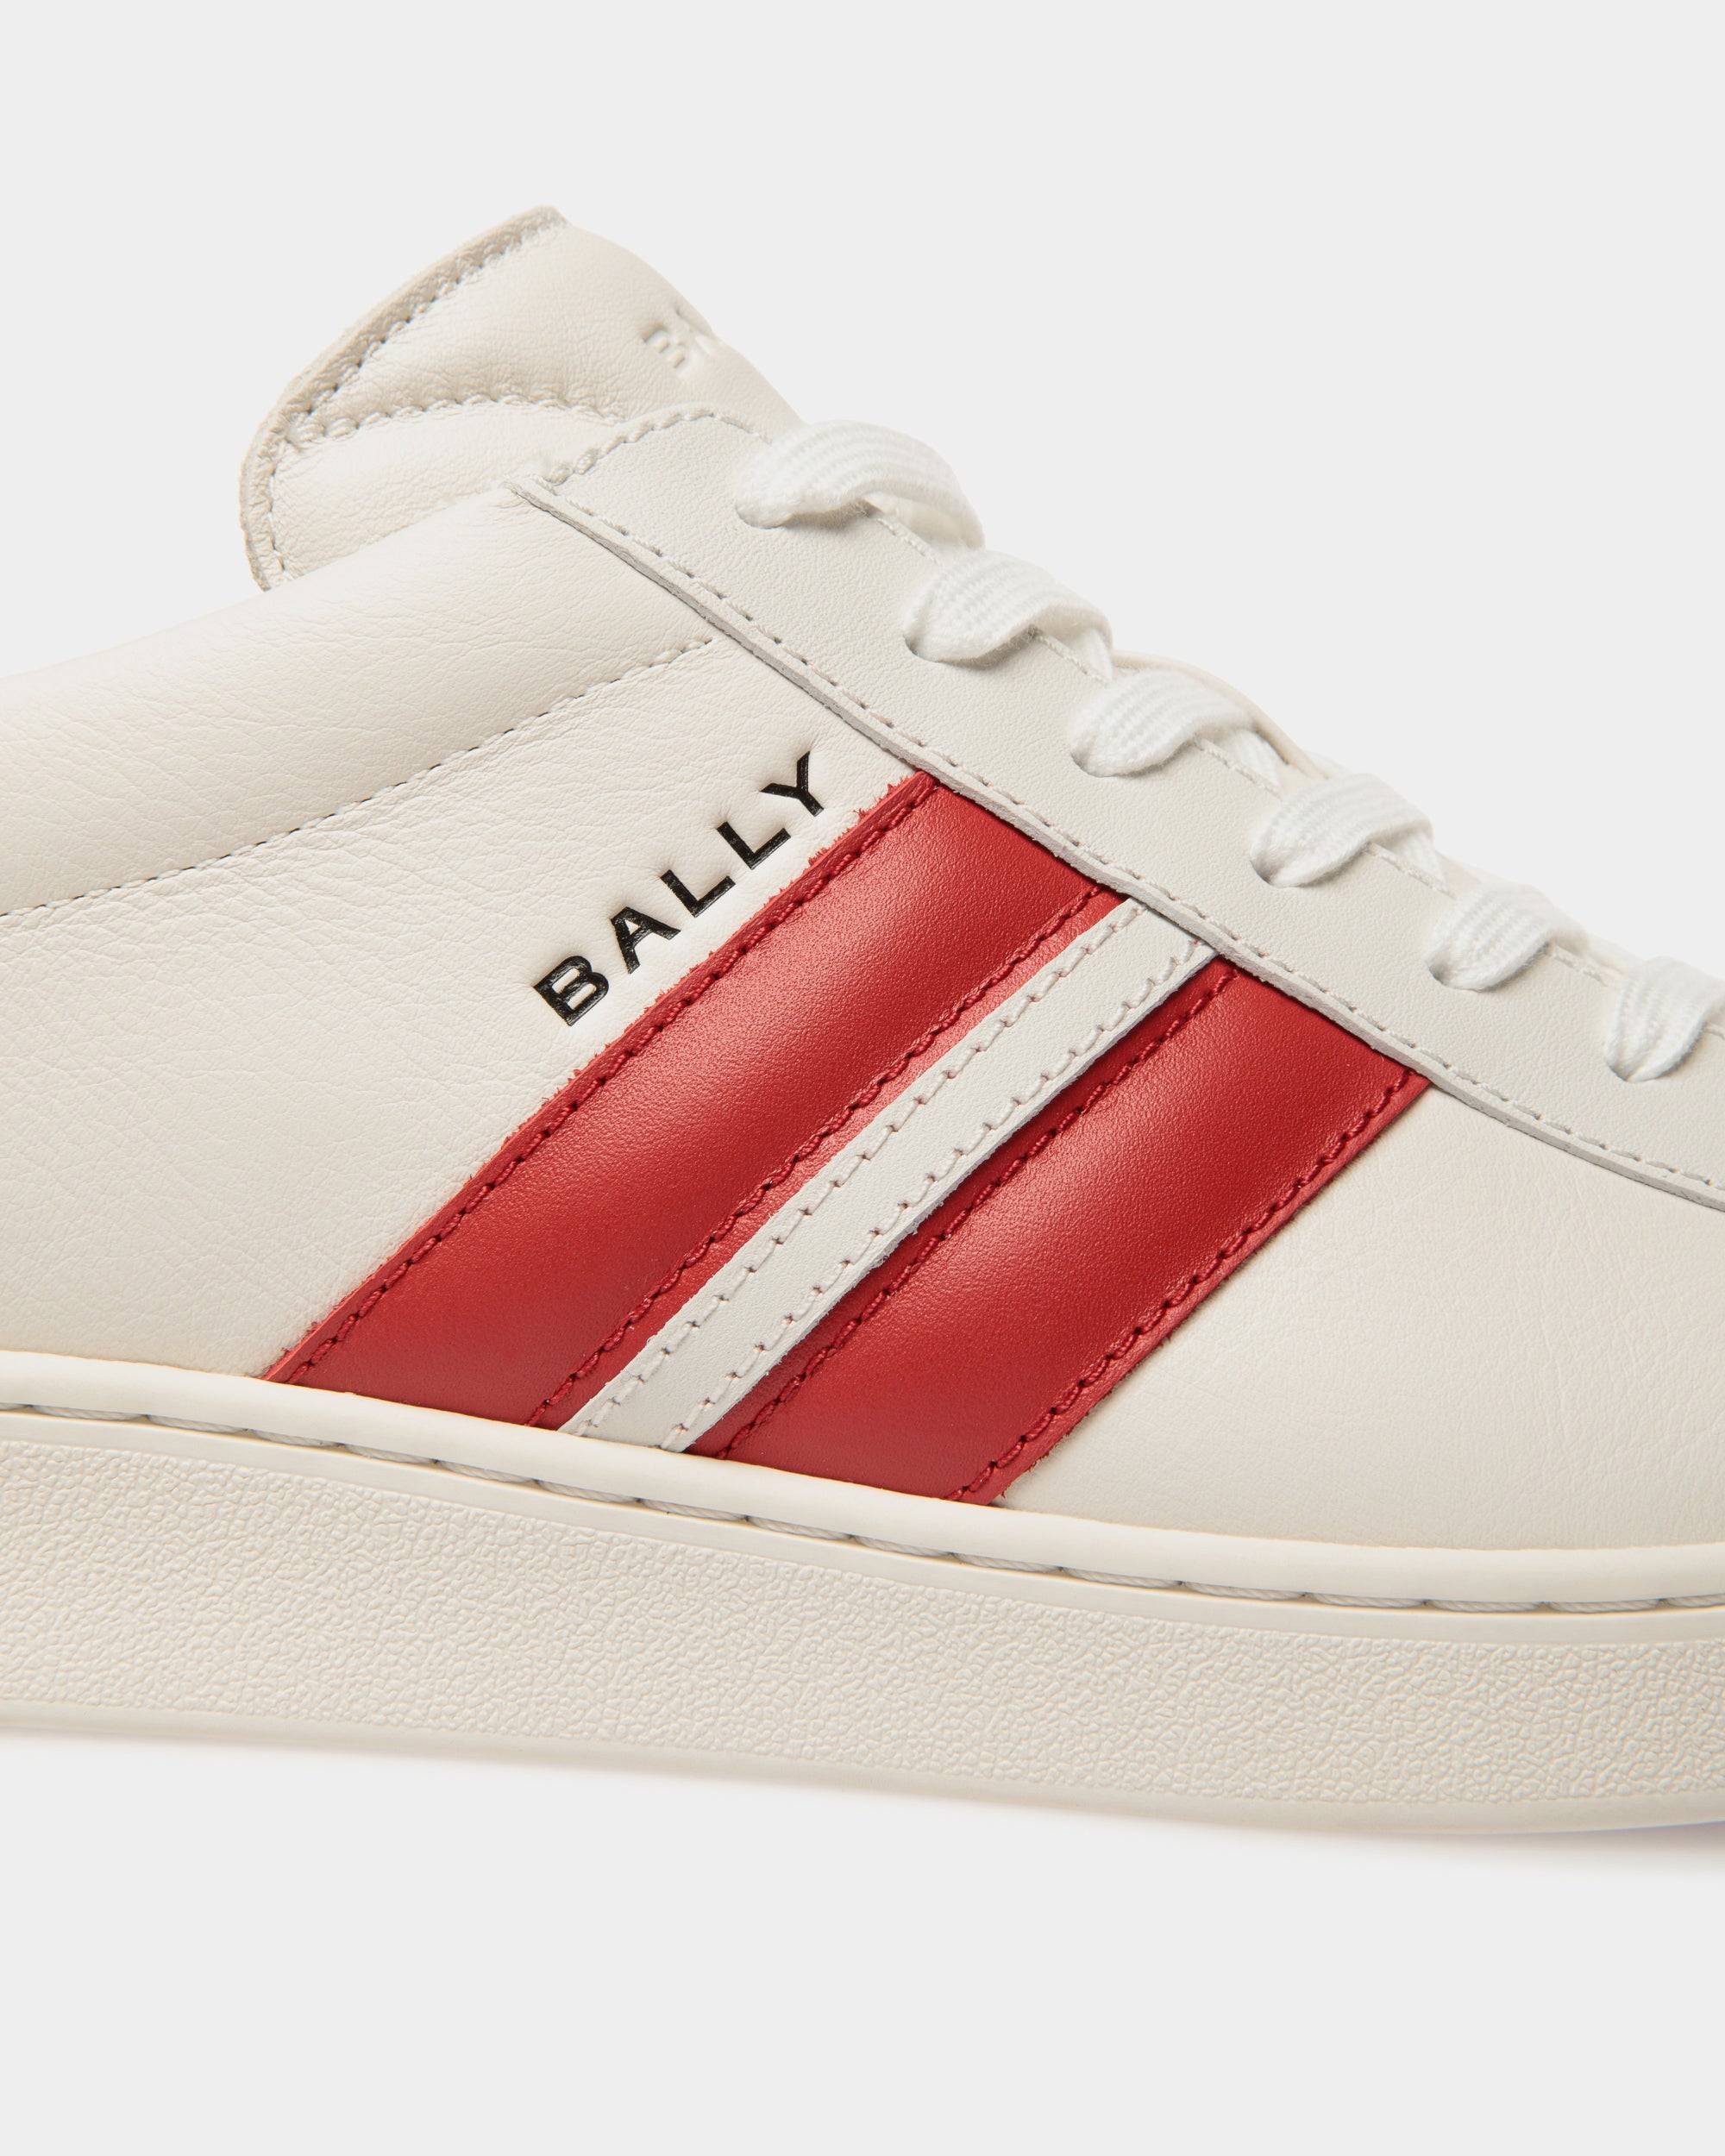 Tennis Sneaker in White and Candy Red Leather - Men's - Bally - 06